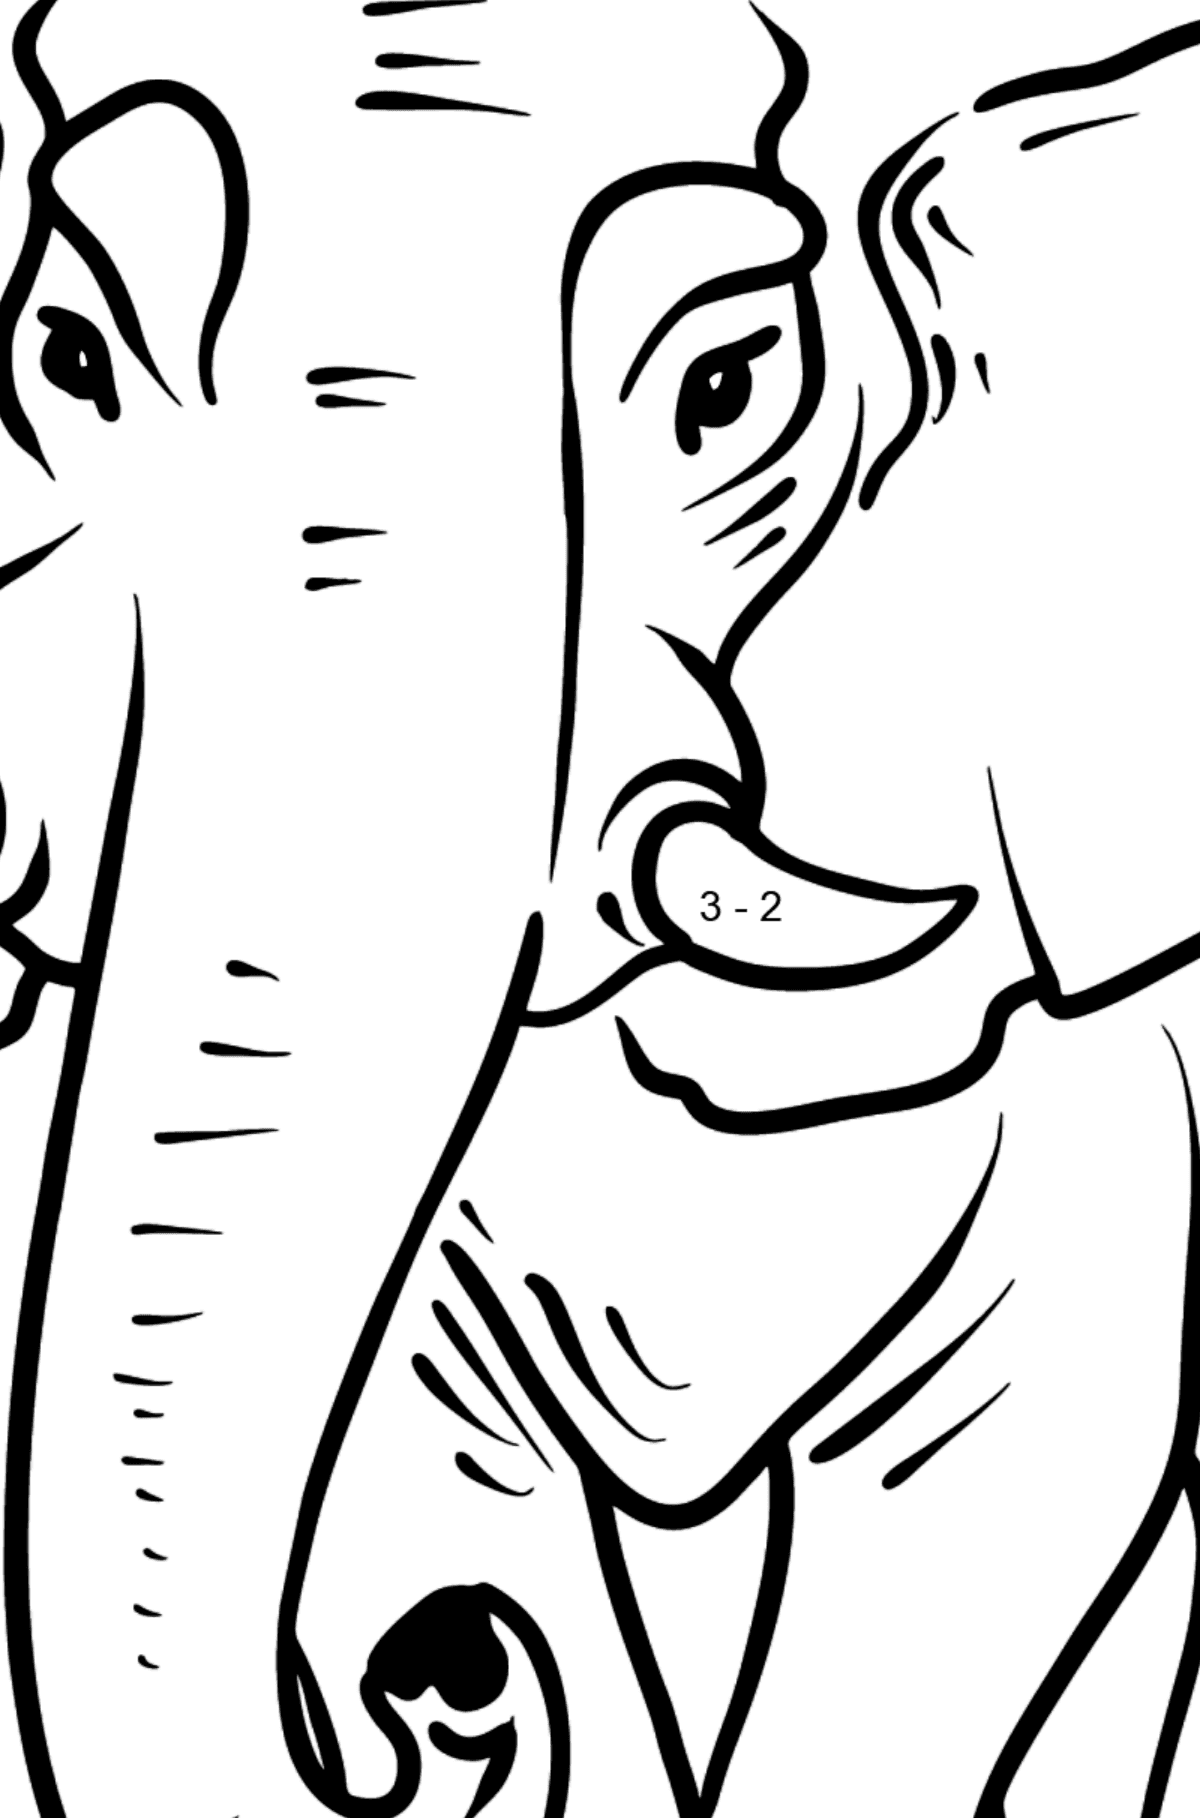 Elephant coloring page - Math Coloring - Subtraction for Kids